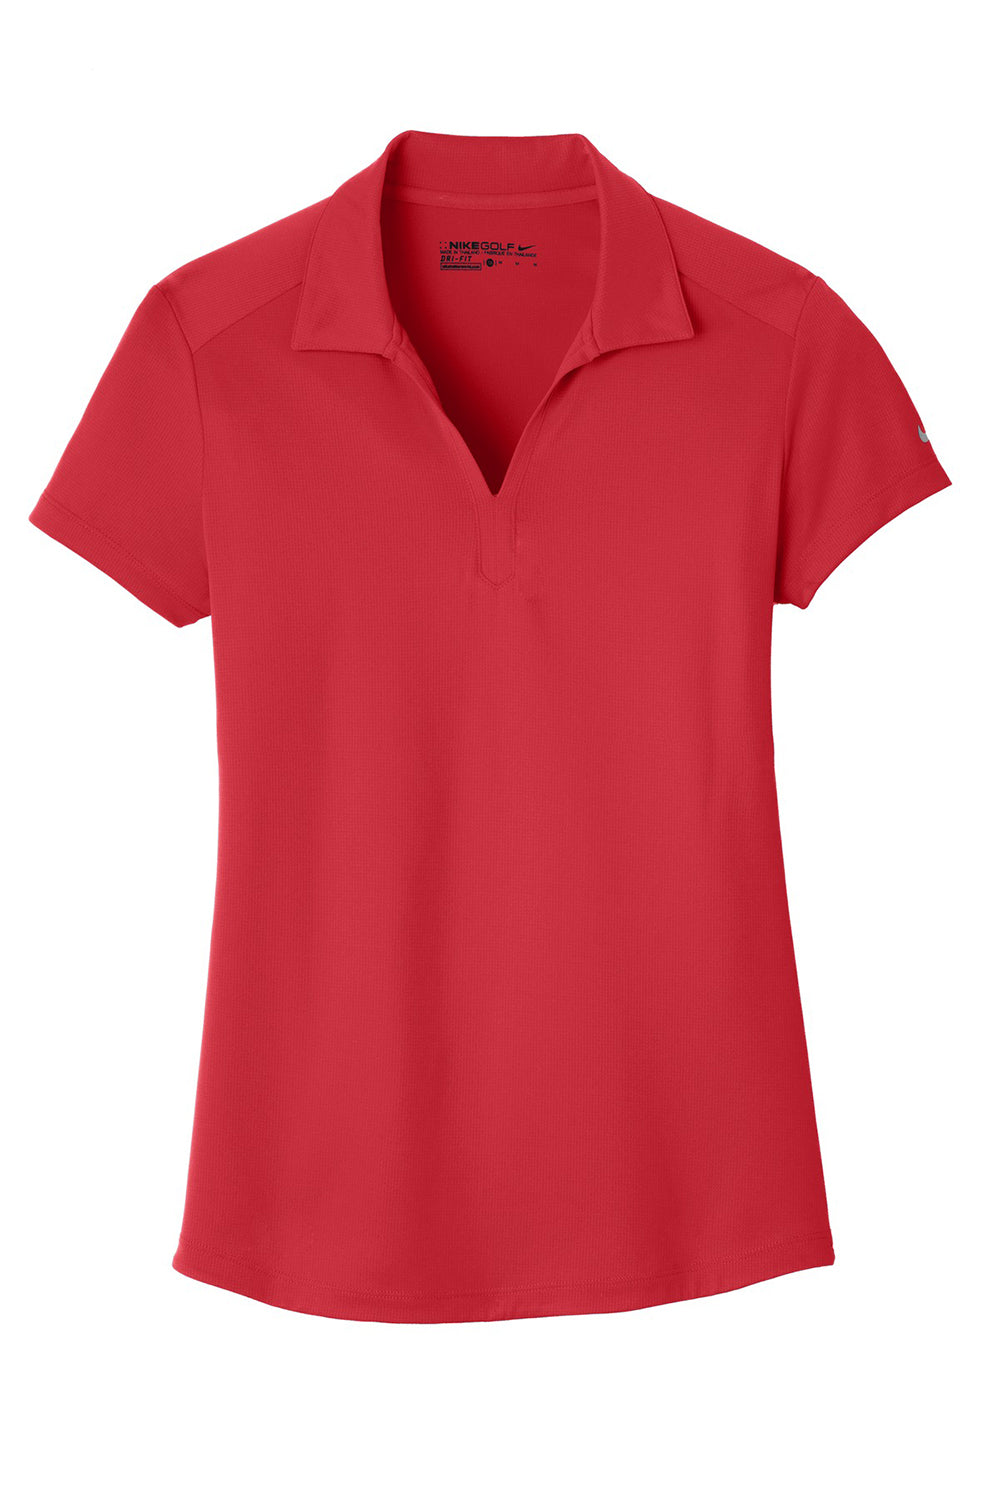 Nike 838957 Womens Legacy Dri-Fit Moisture Wicking Short Sleeve Polo Shirt Gym Red Flat Front